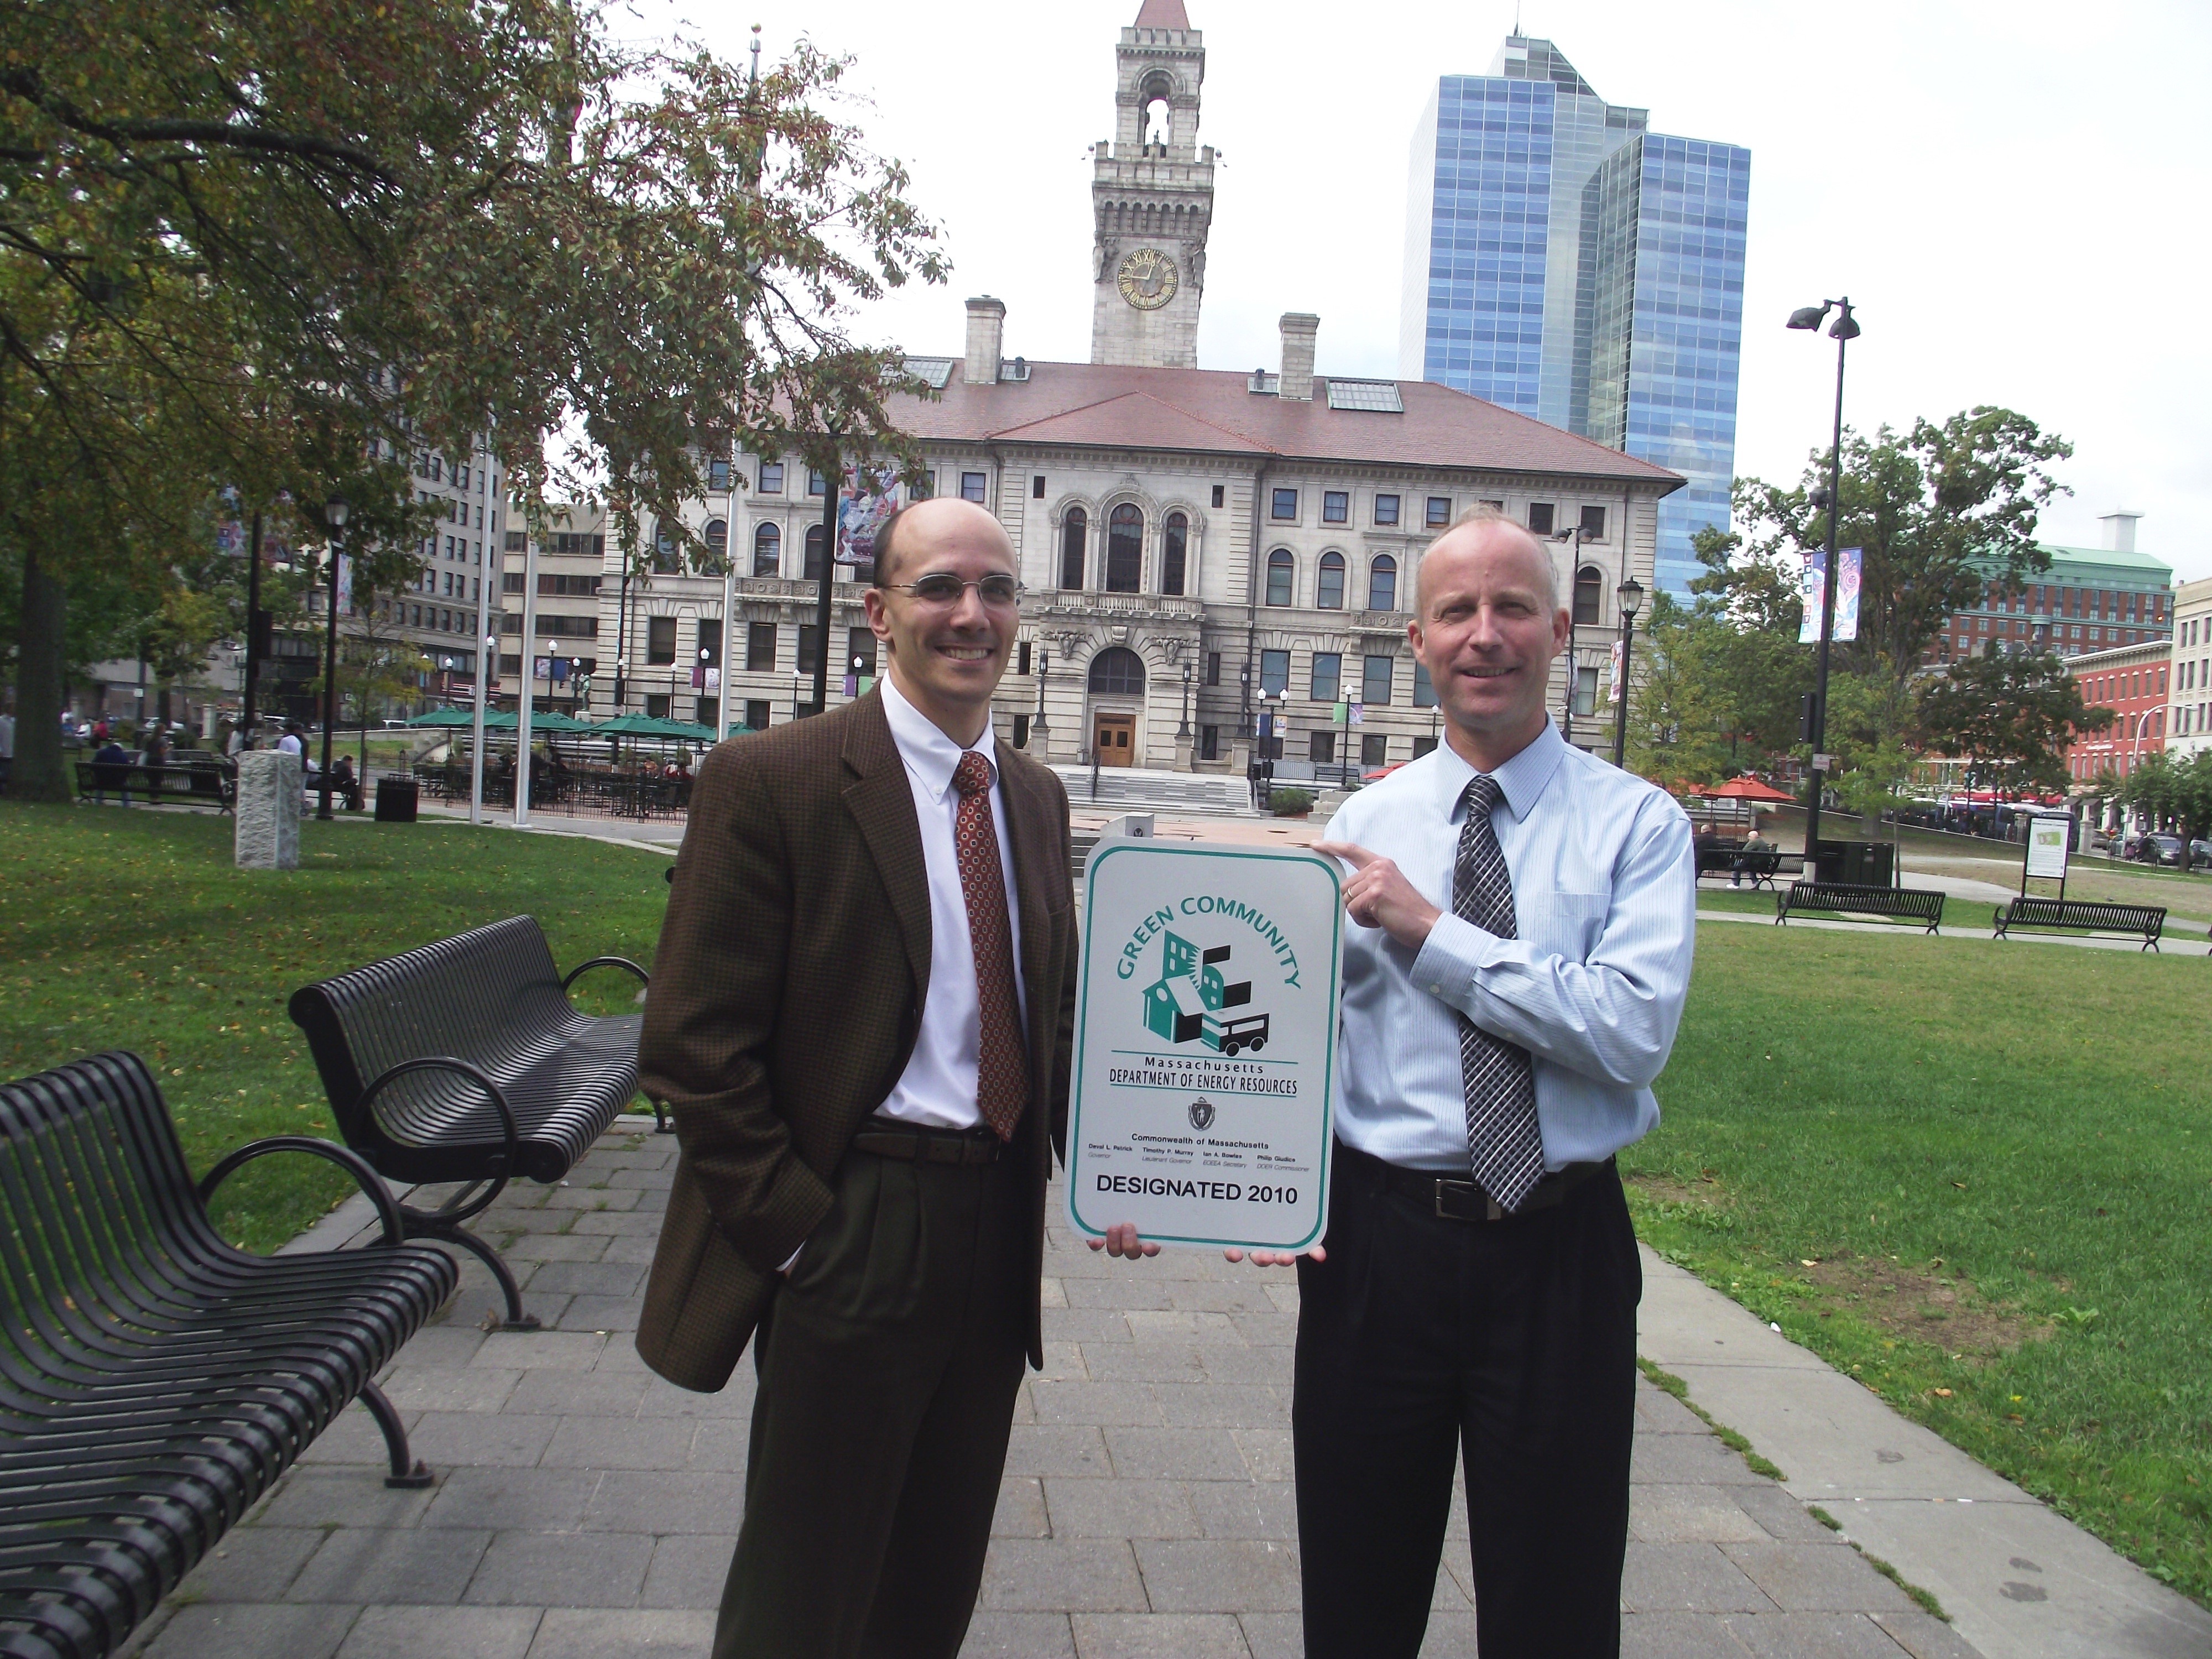 Worcester staff that worked on the city's Green Community designation